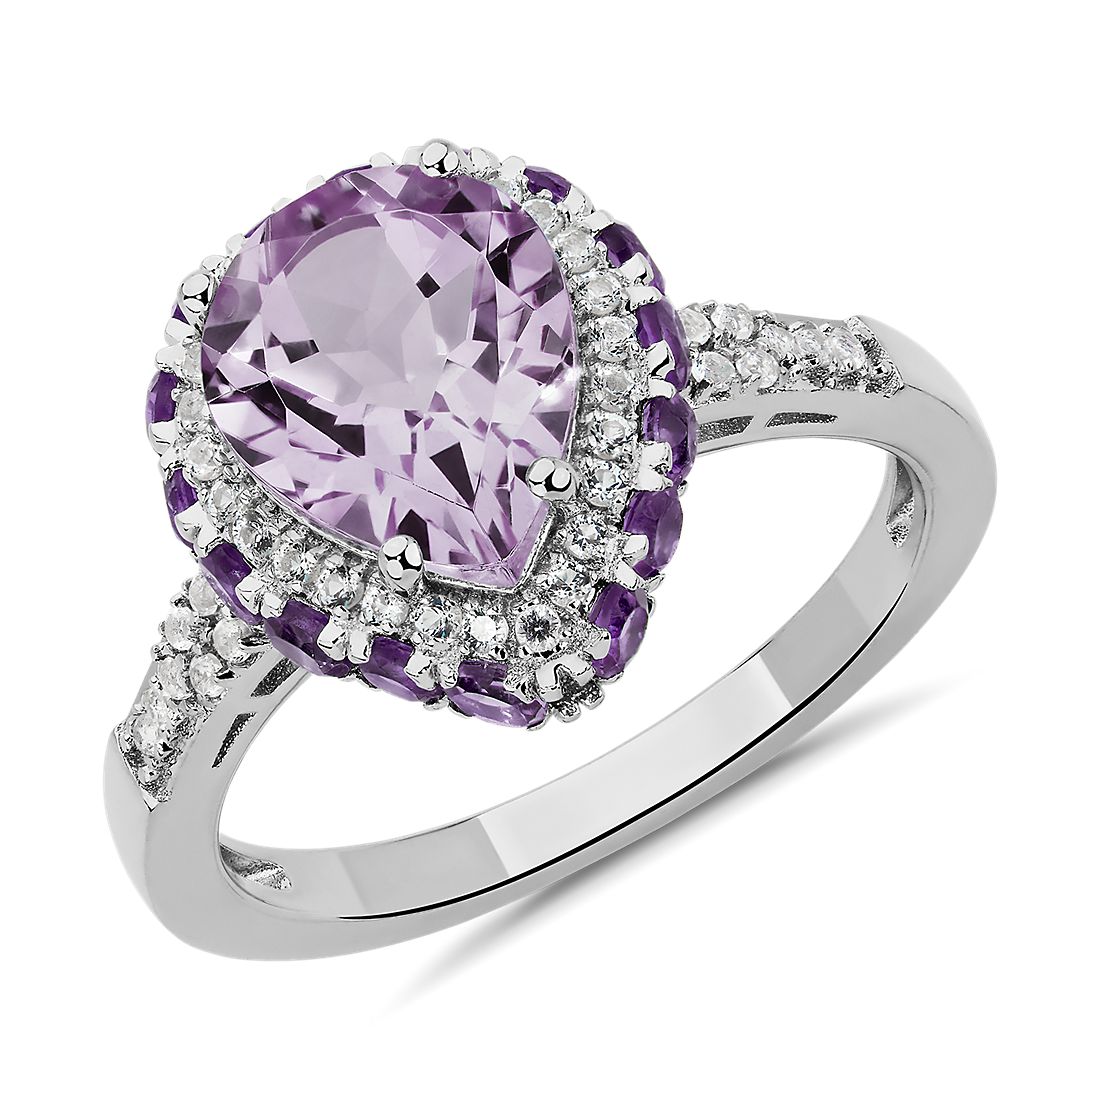 Pear Shaped Amethyst Ring in Sterling Silver with White Topaz | Blue ...